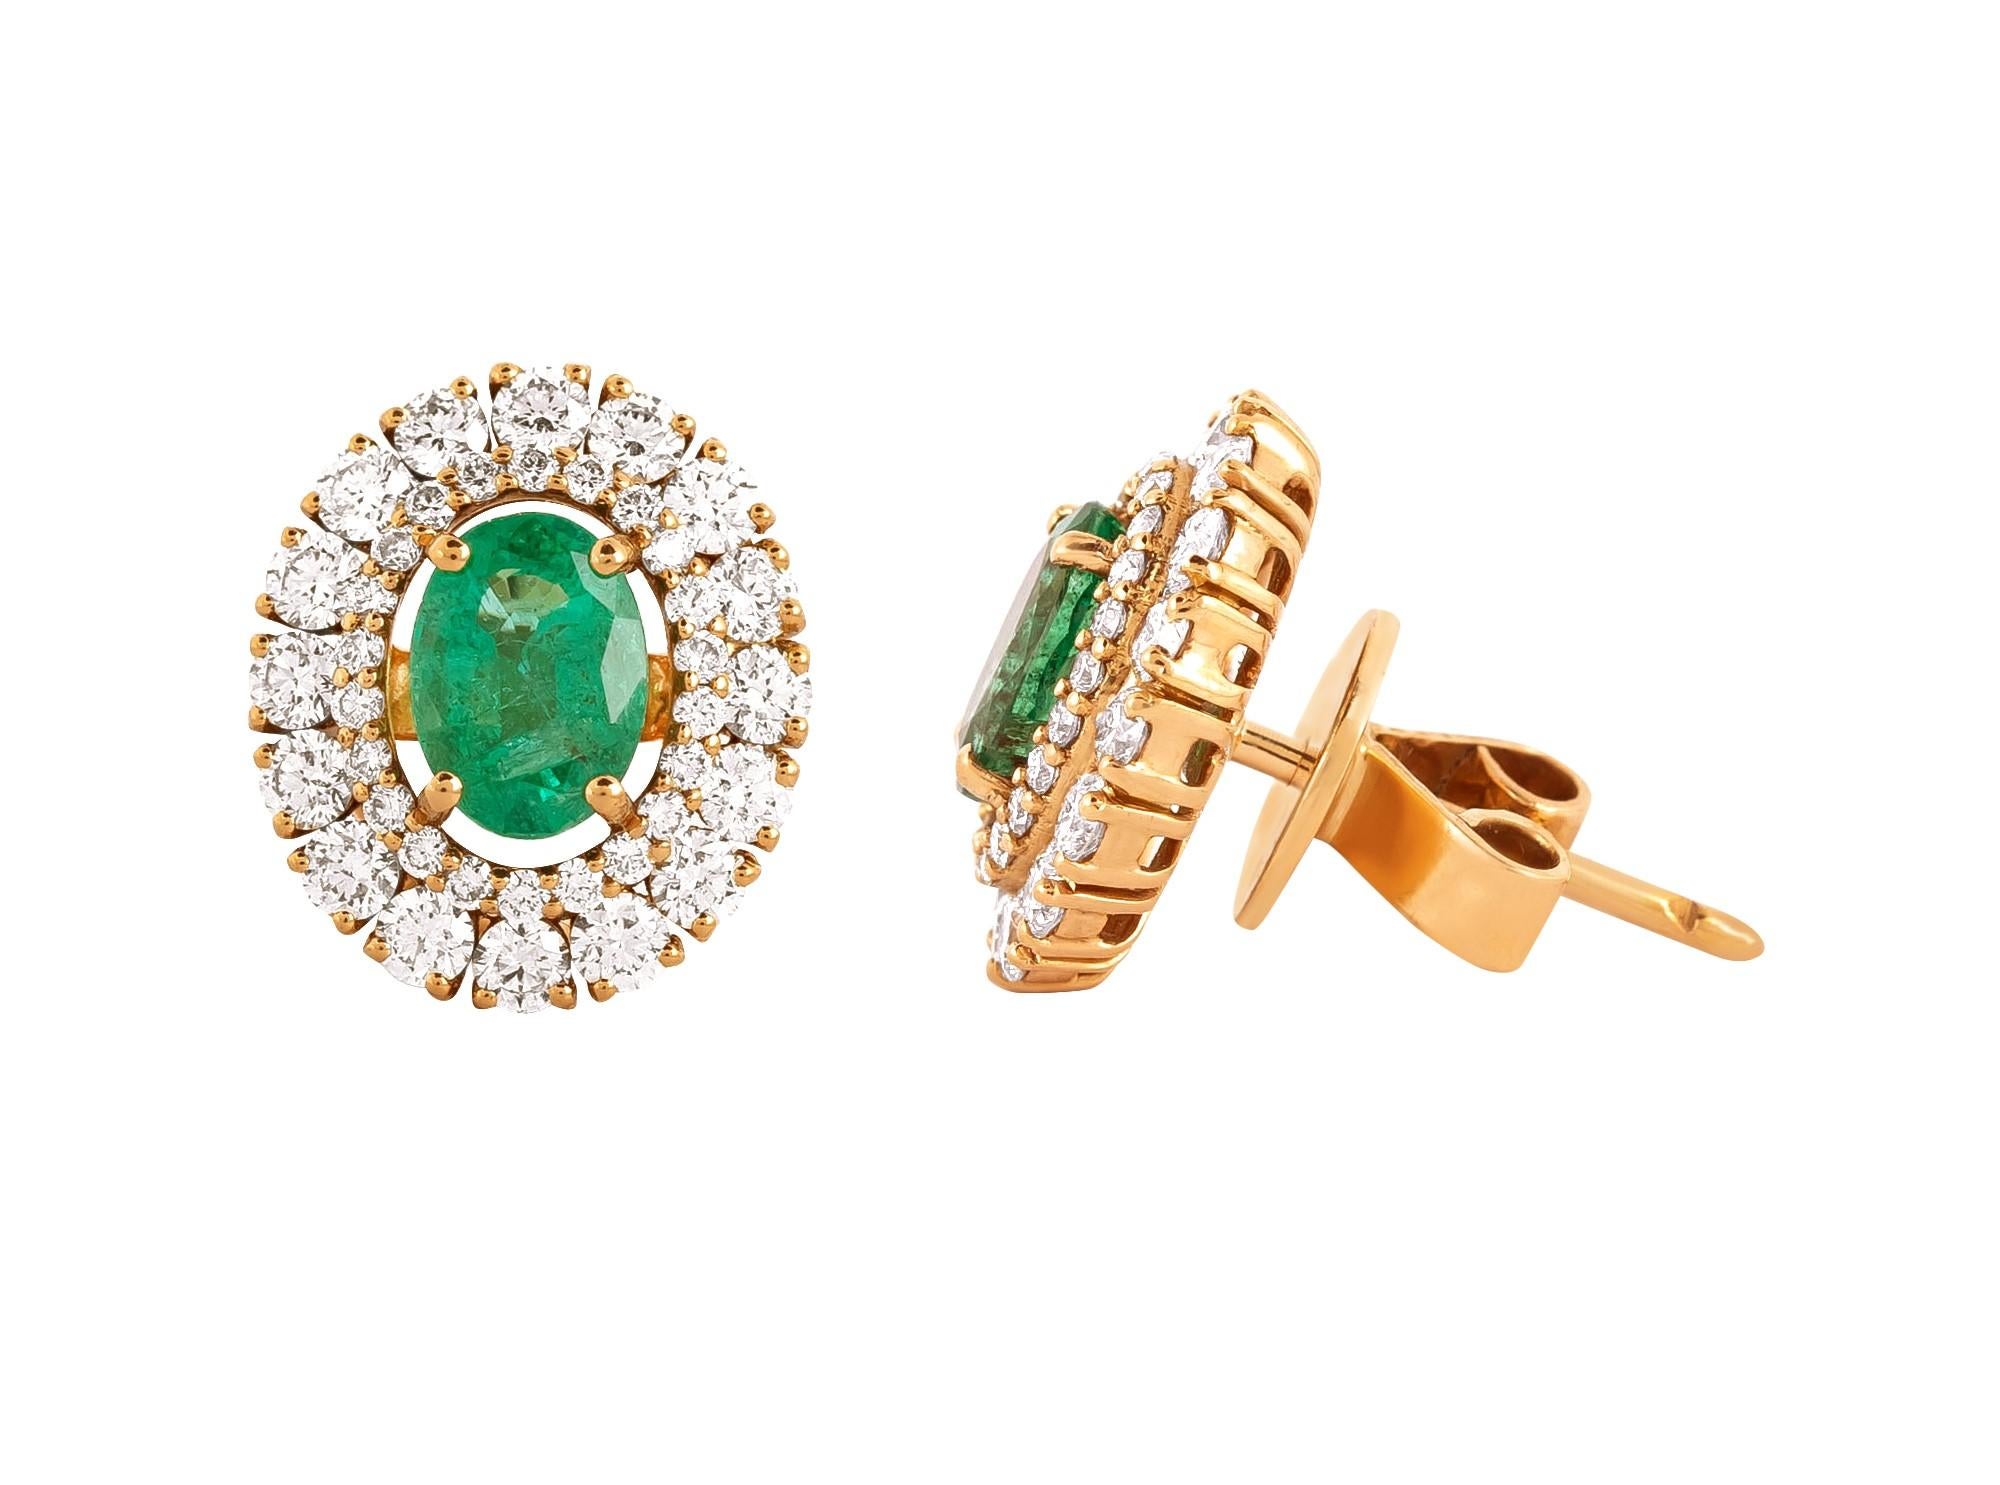 Contemporary 18 Karat Gold 2.79 Carat Diamond and Emerald Solitaire Stud Earrings For Sale